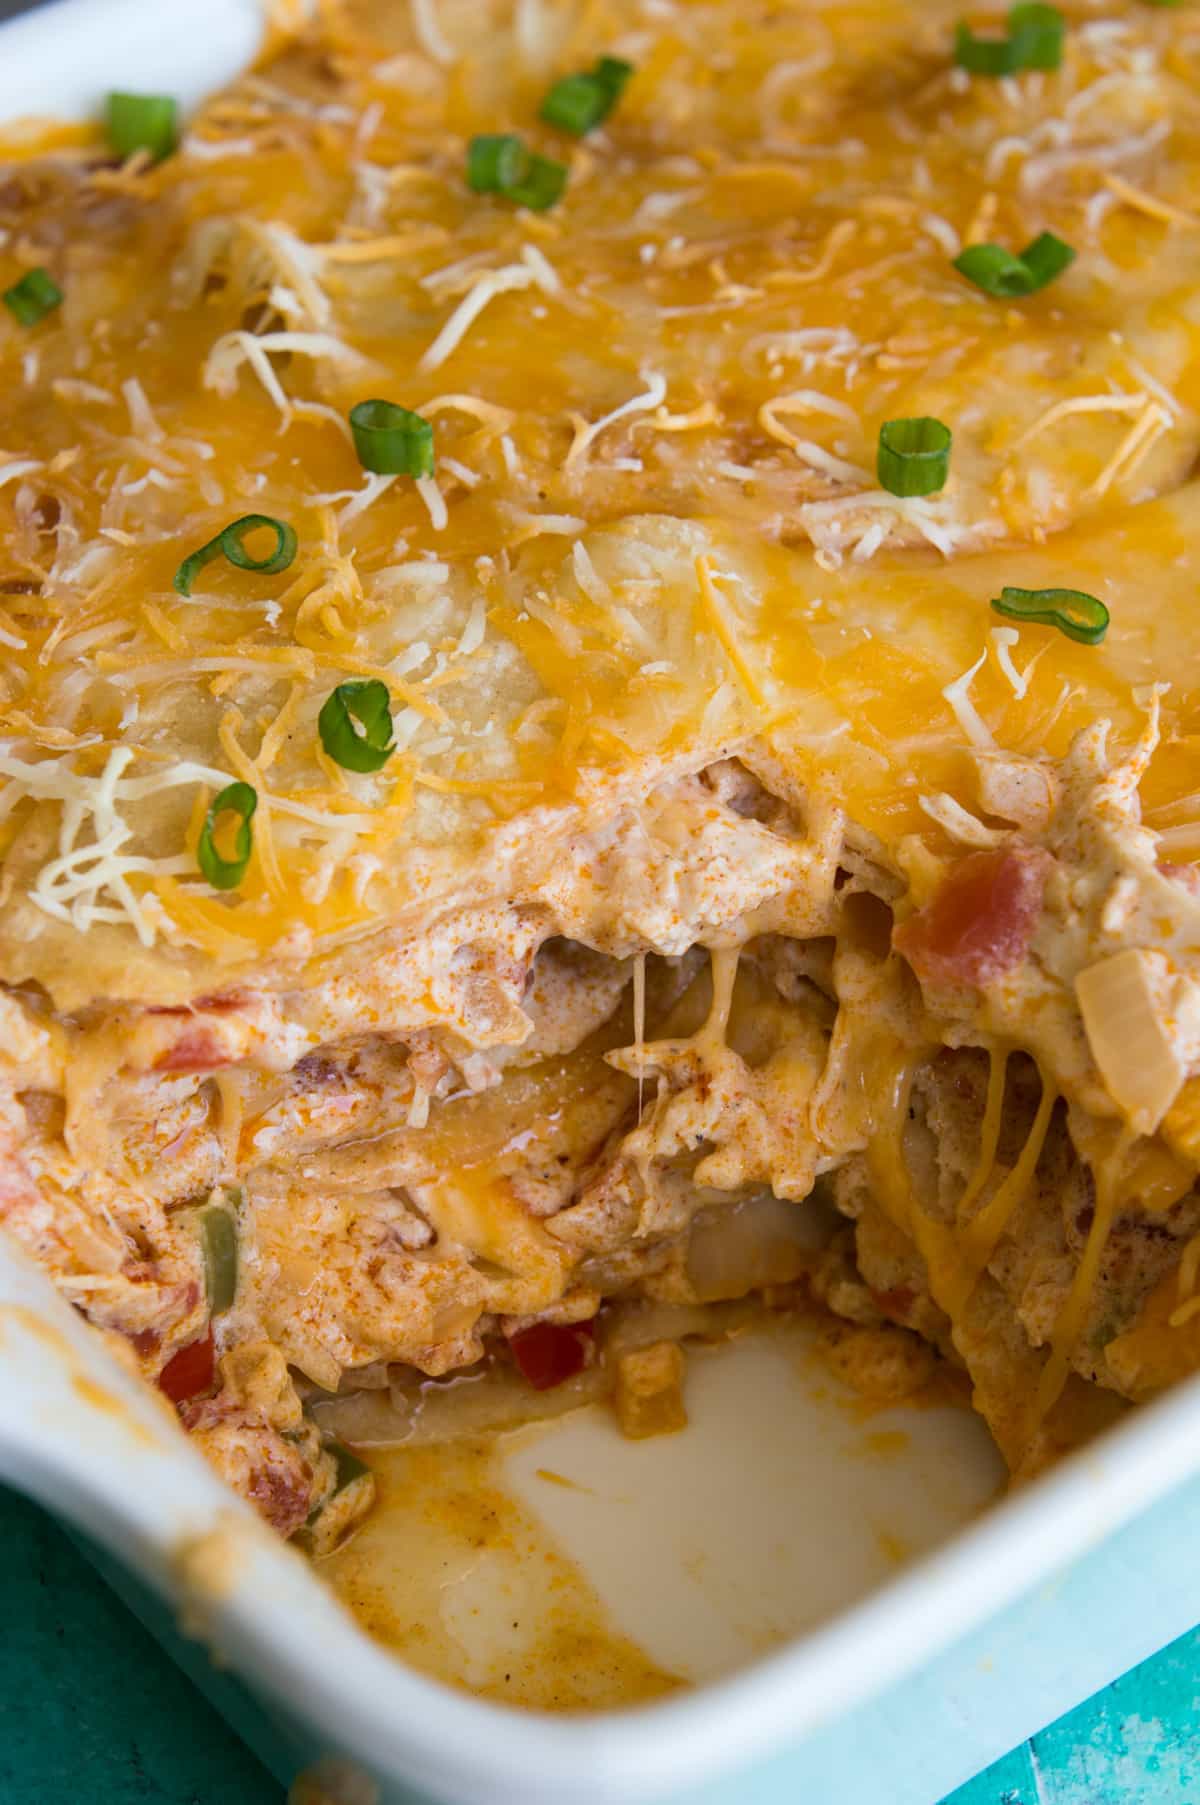 Casserole dish filled with King Ranch Chicken, showing a slice missing and layers of tortillas with a creamy chicken mixture, strings of cheese connecting it all. 